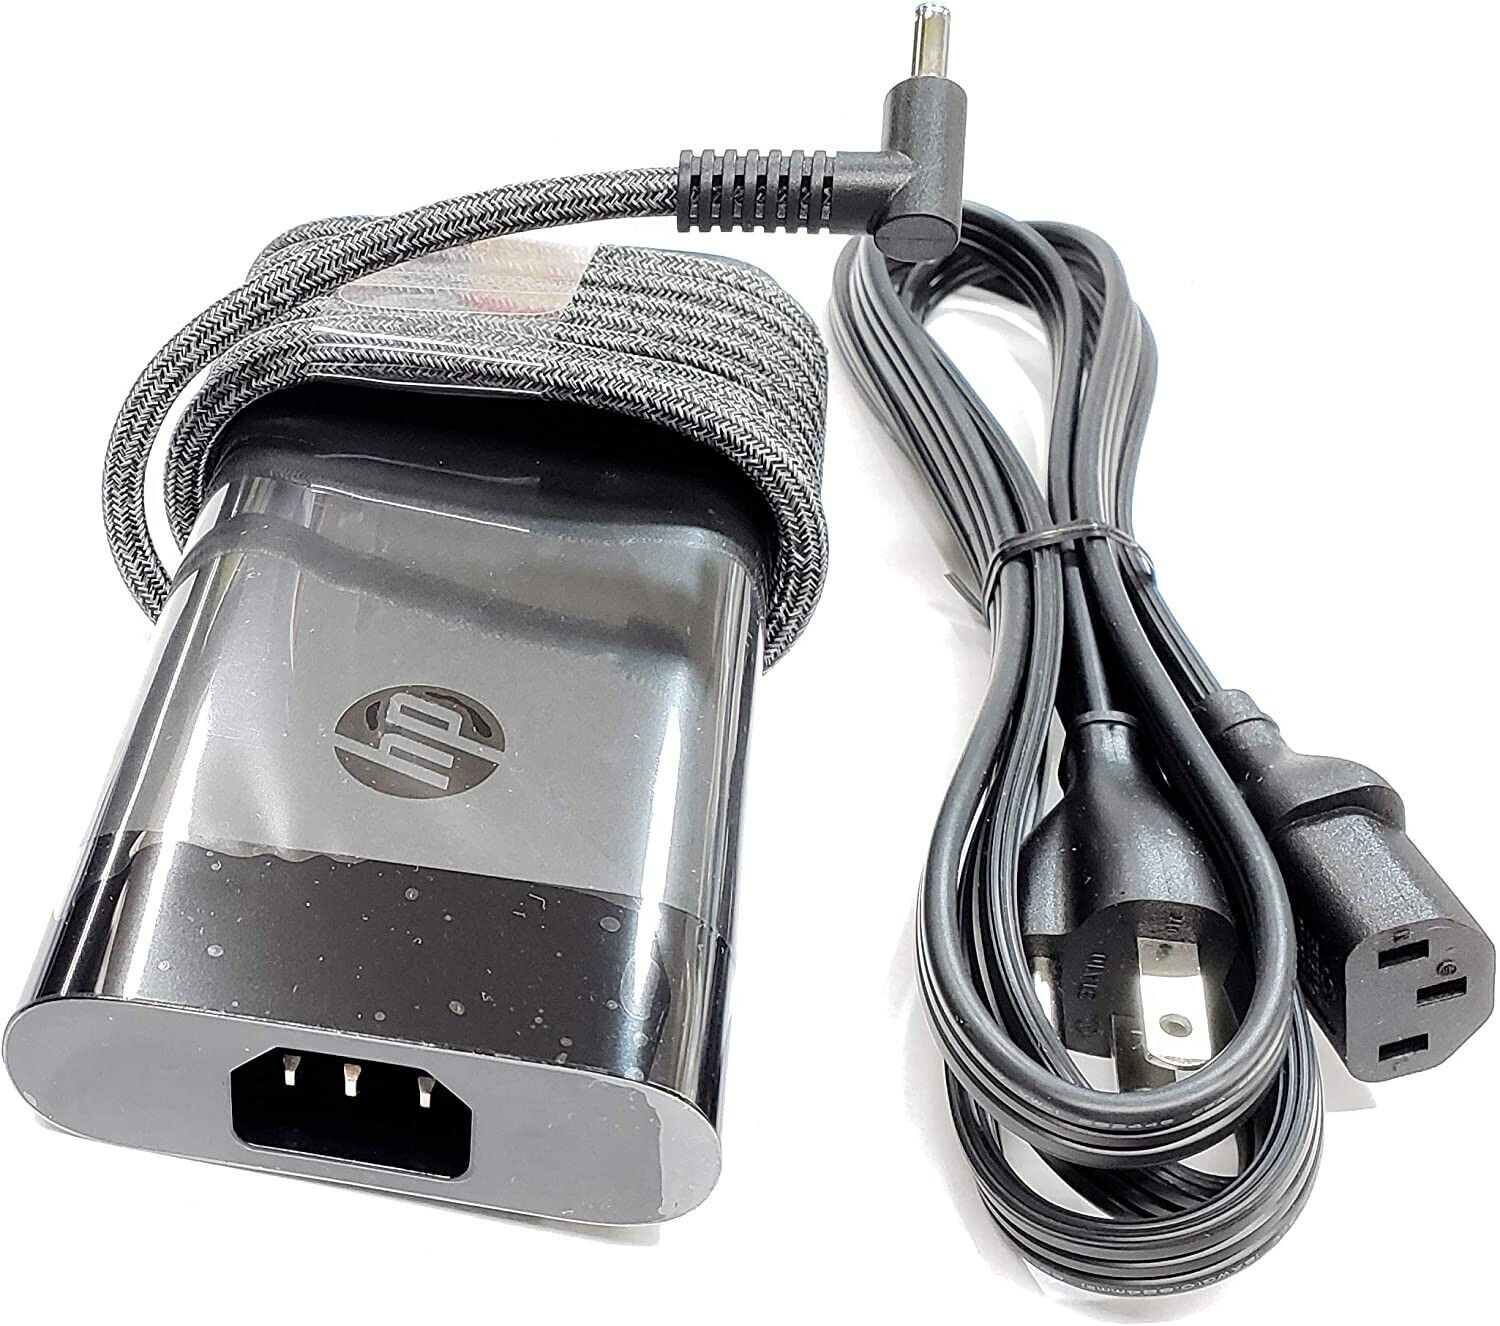 New Genuine 200W AC Charger For Victus by HP 16.1'' Gaming Laptop PC 16-D1010NR